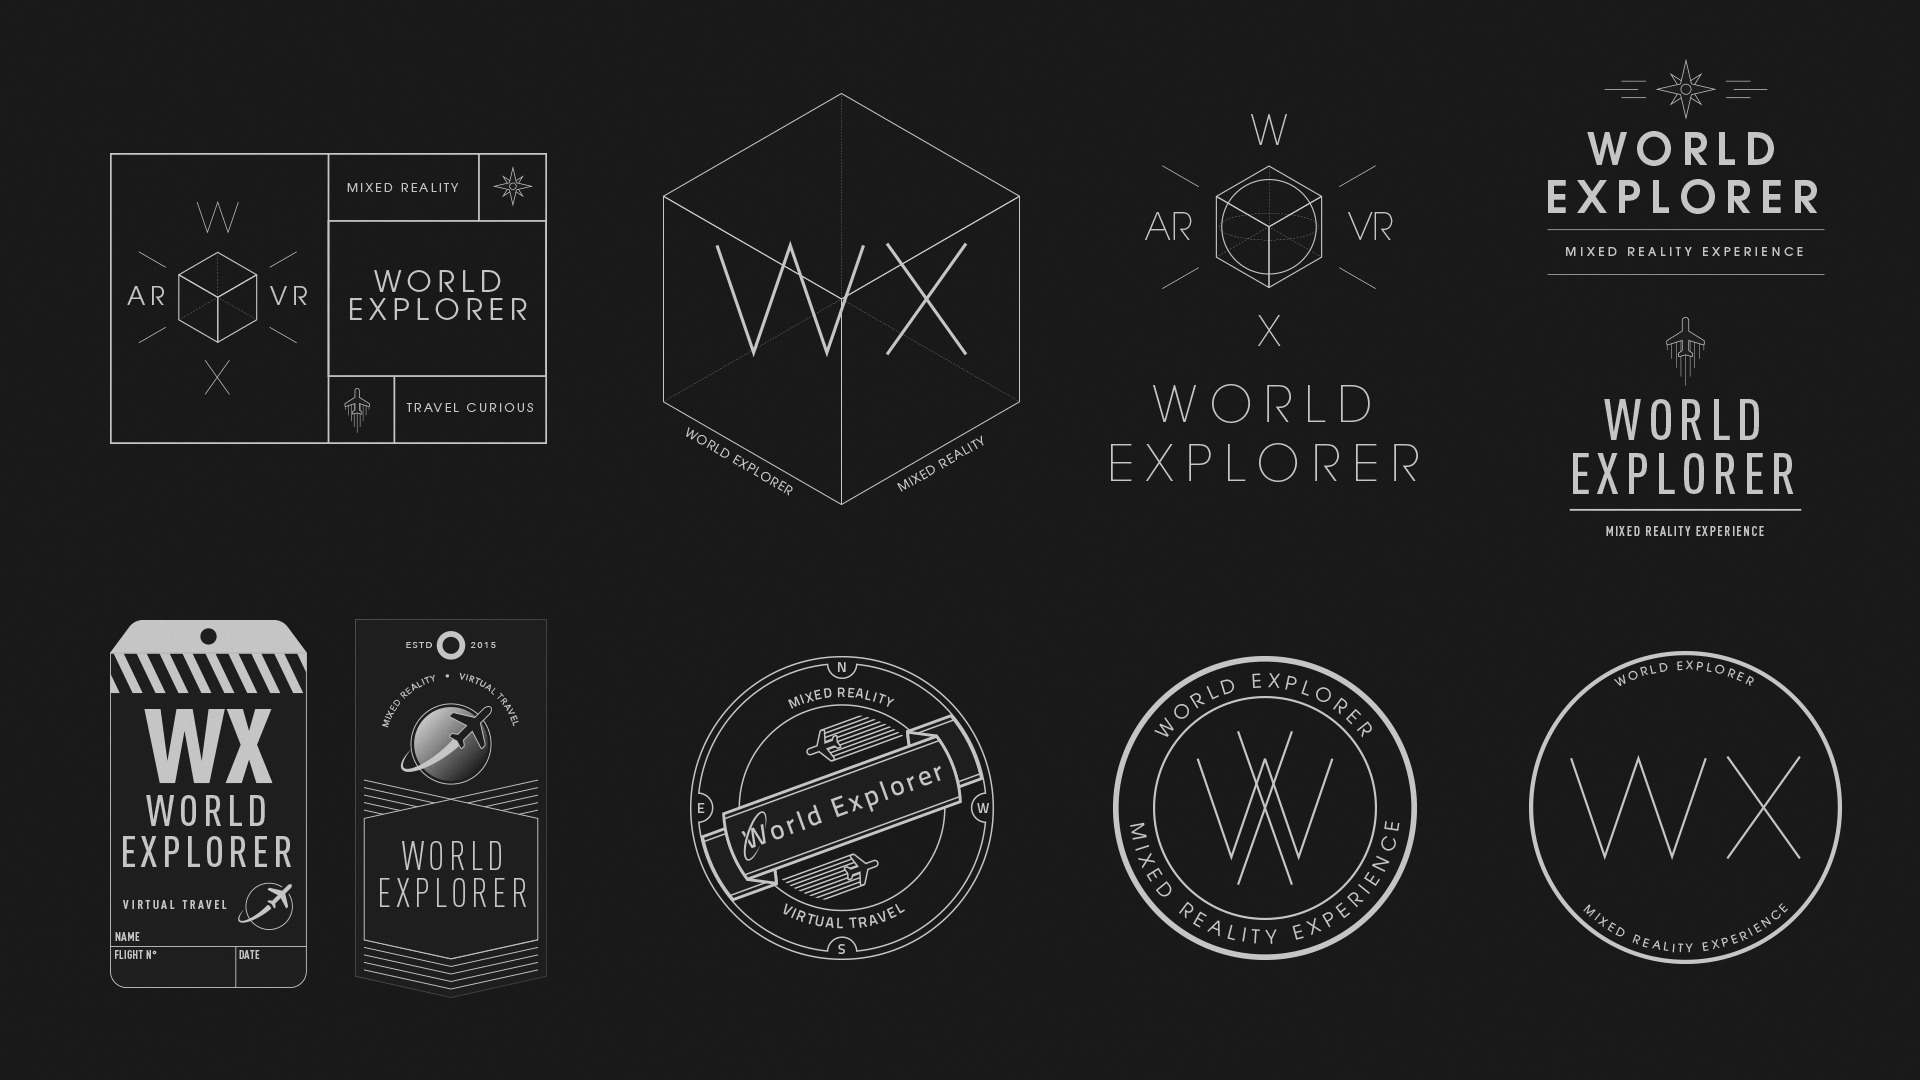  Design explorations for the startup sequence badge.&nbsp; World Explorer was the name of the project during pre-production.   